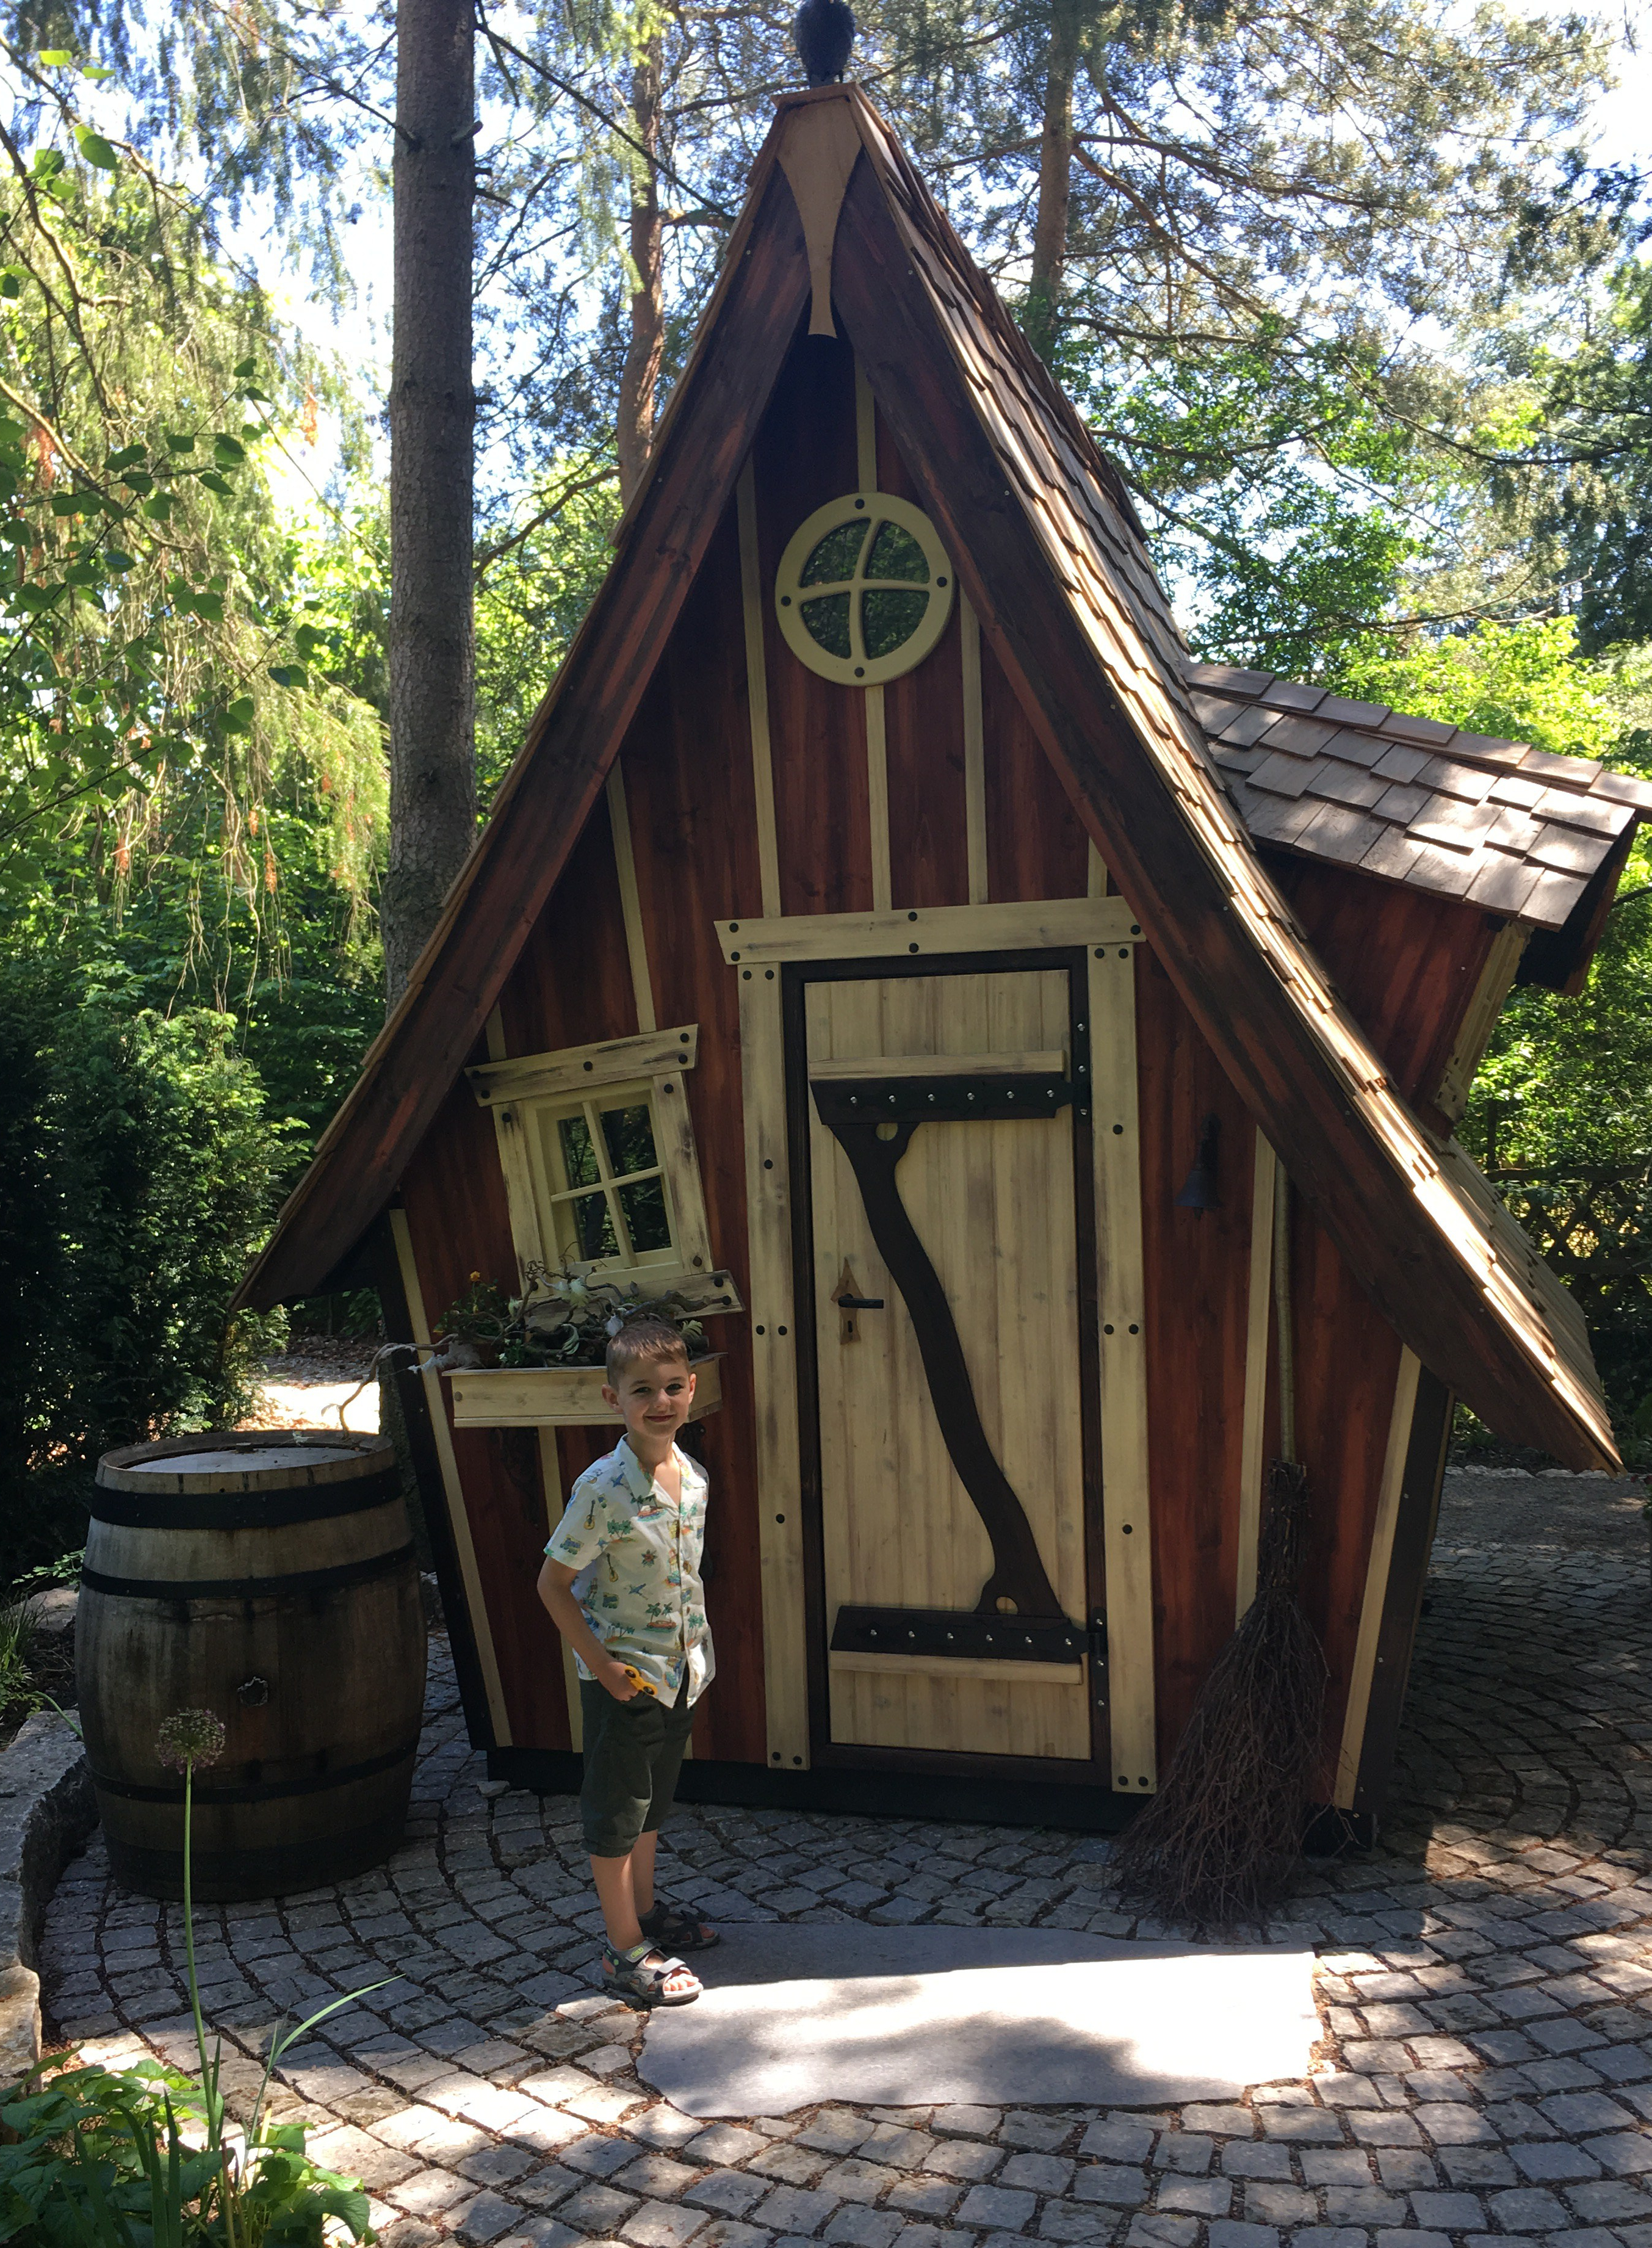 Things Helen Loves, small boy next to model of traditional German house.